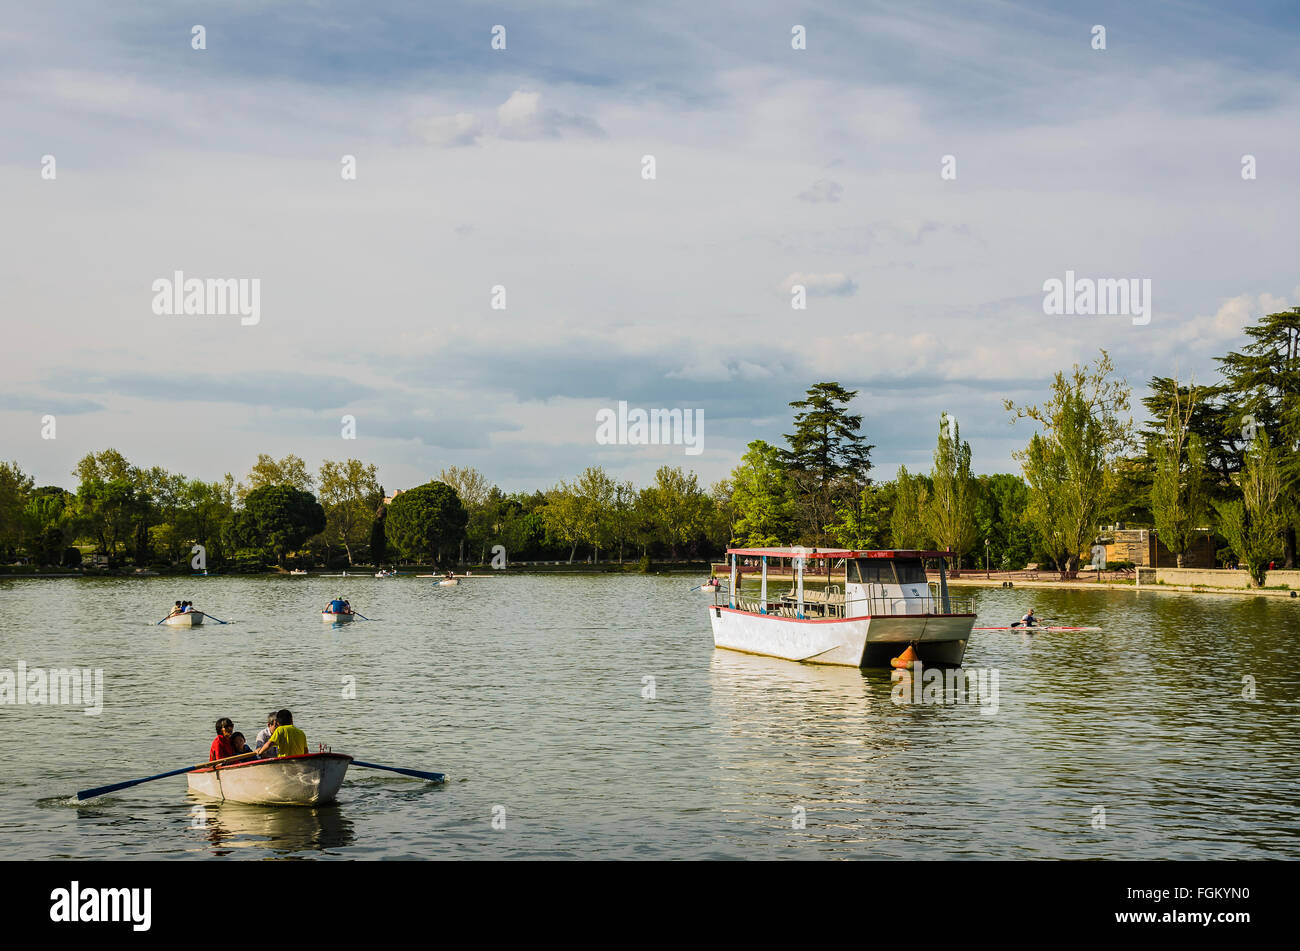 People in leisure time on the Country House lake, Madrid, Spain Stock Photo